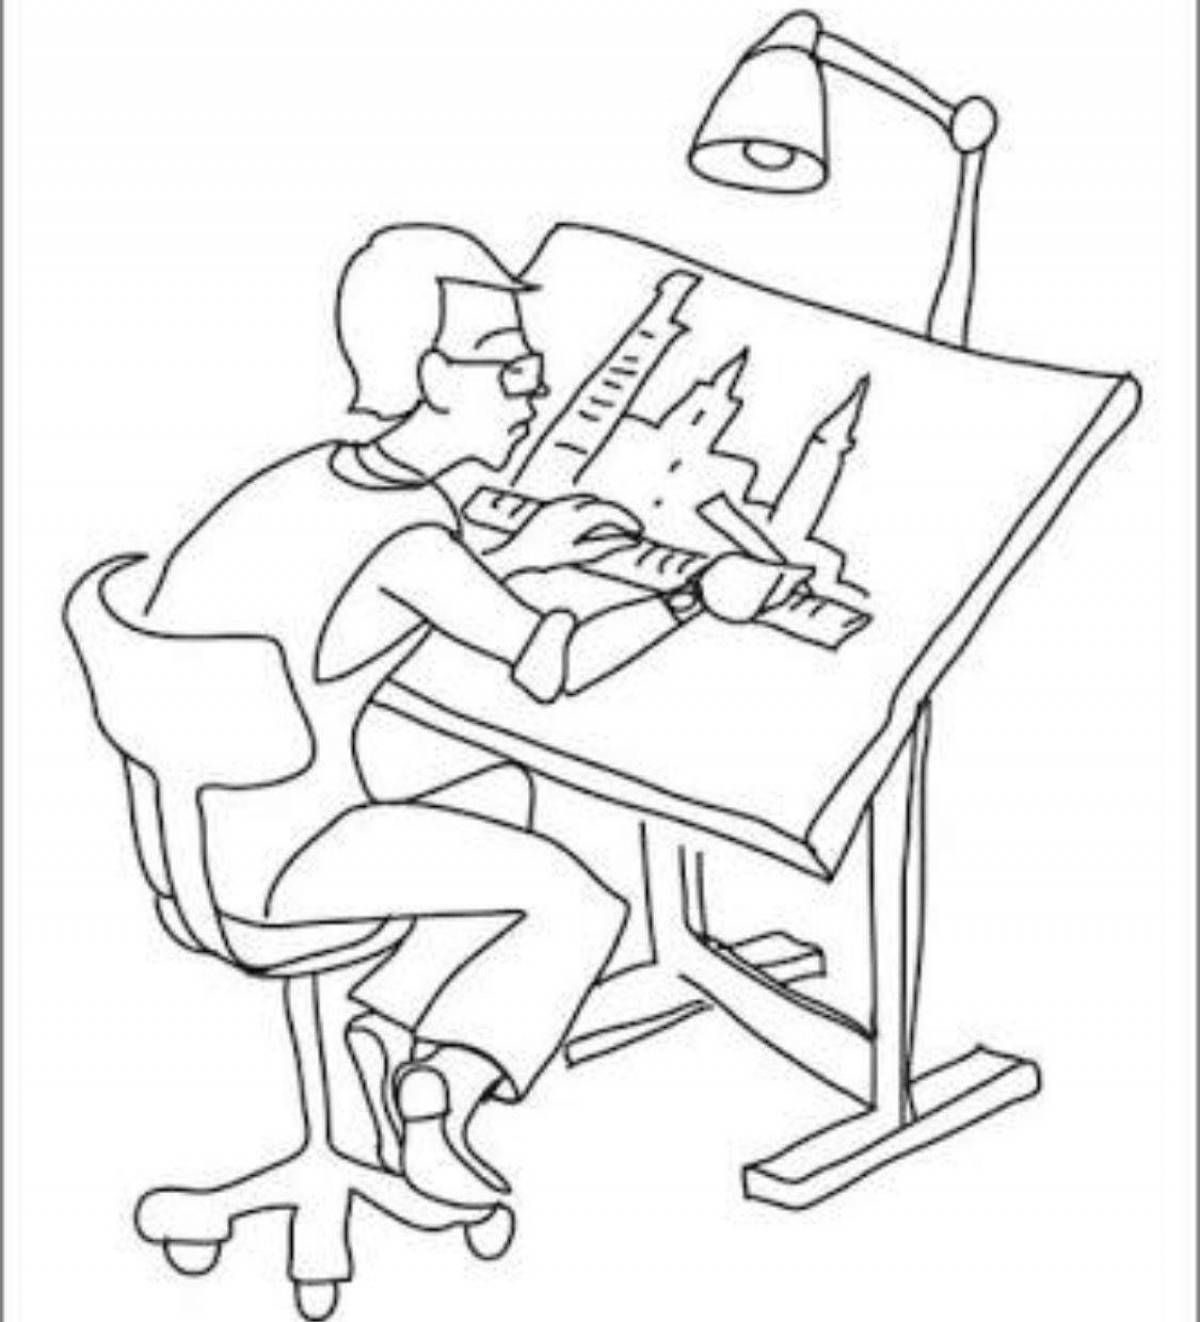 Programmer coloring book